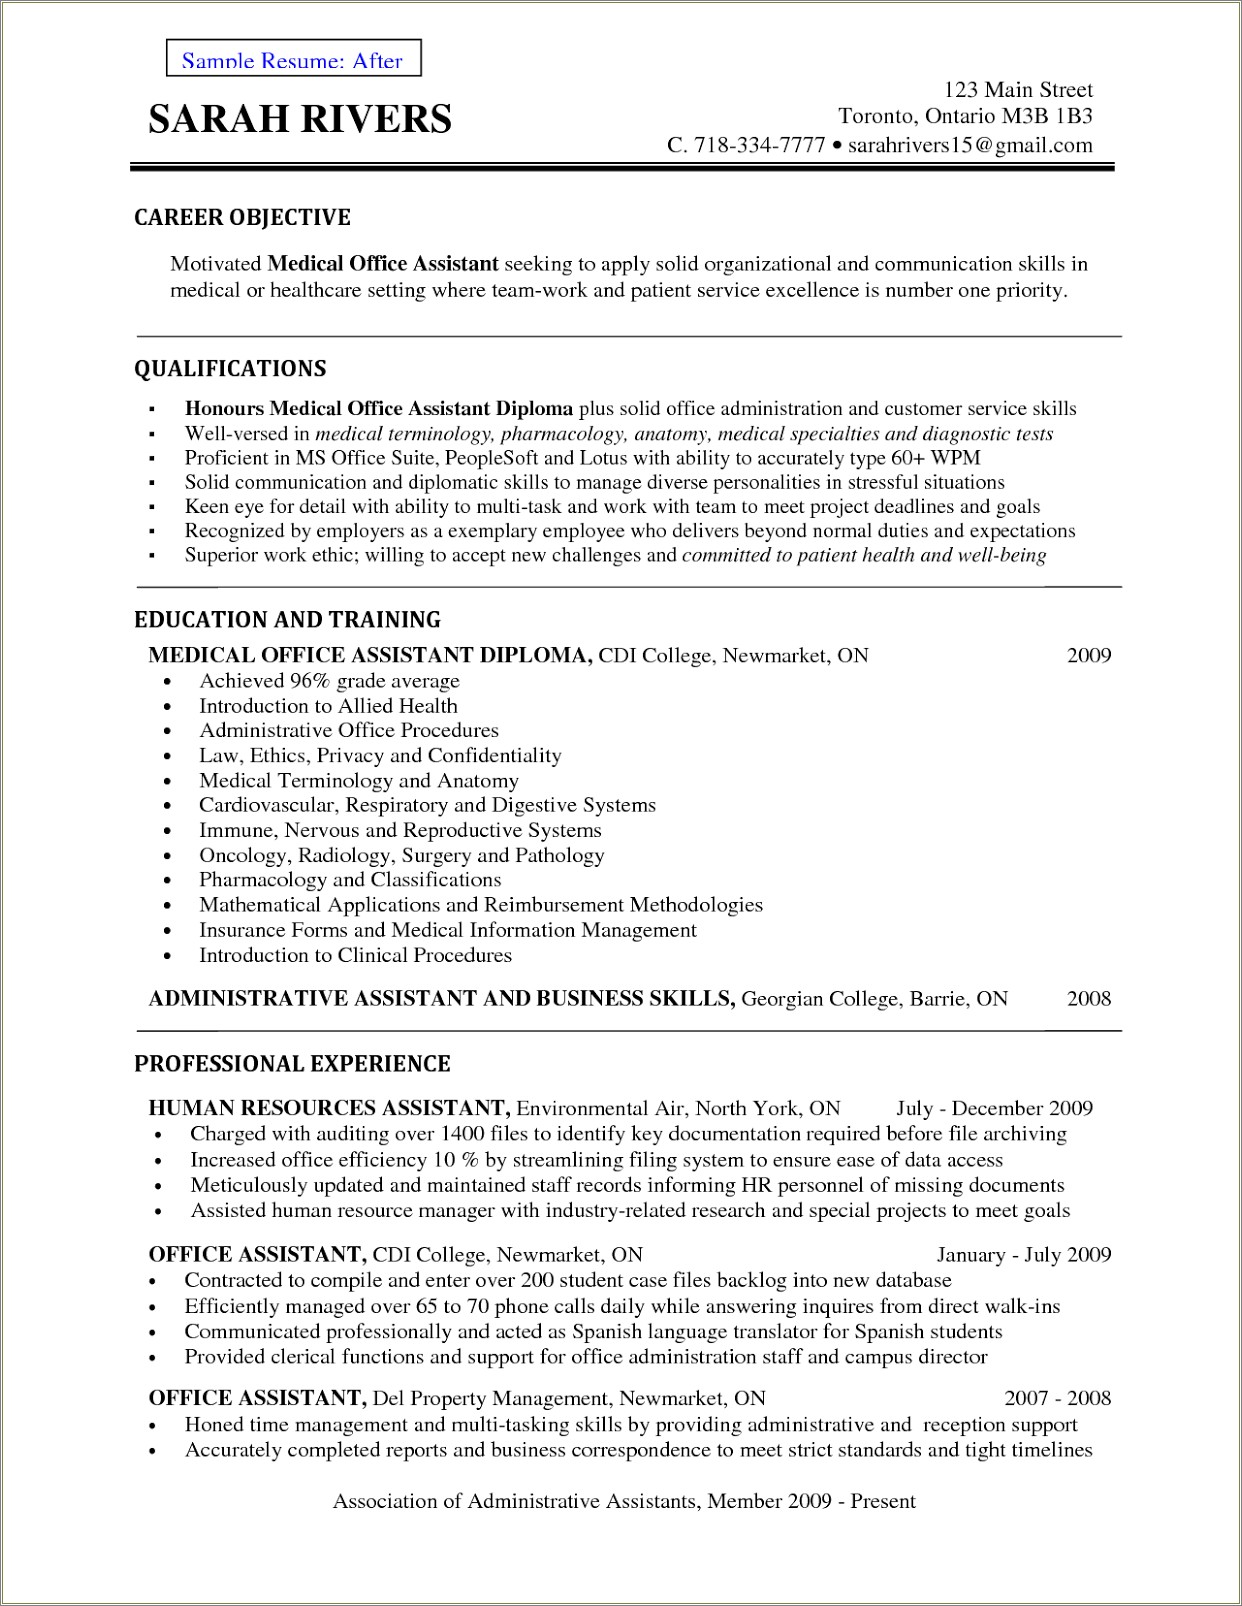 A Manager's Objective In A Resume Sample